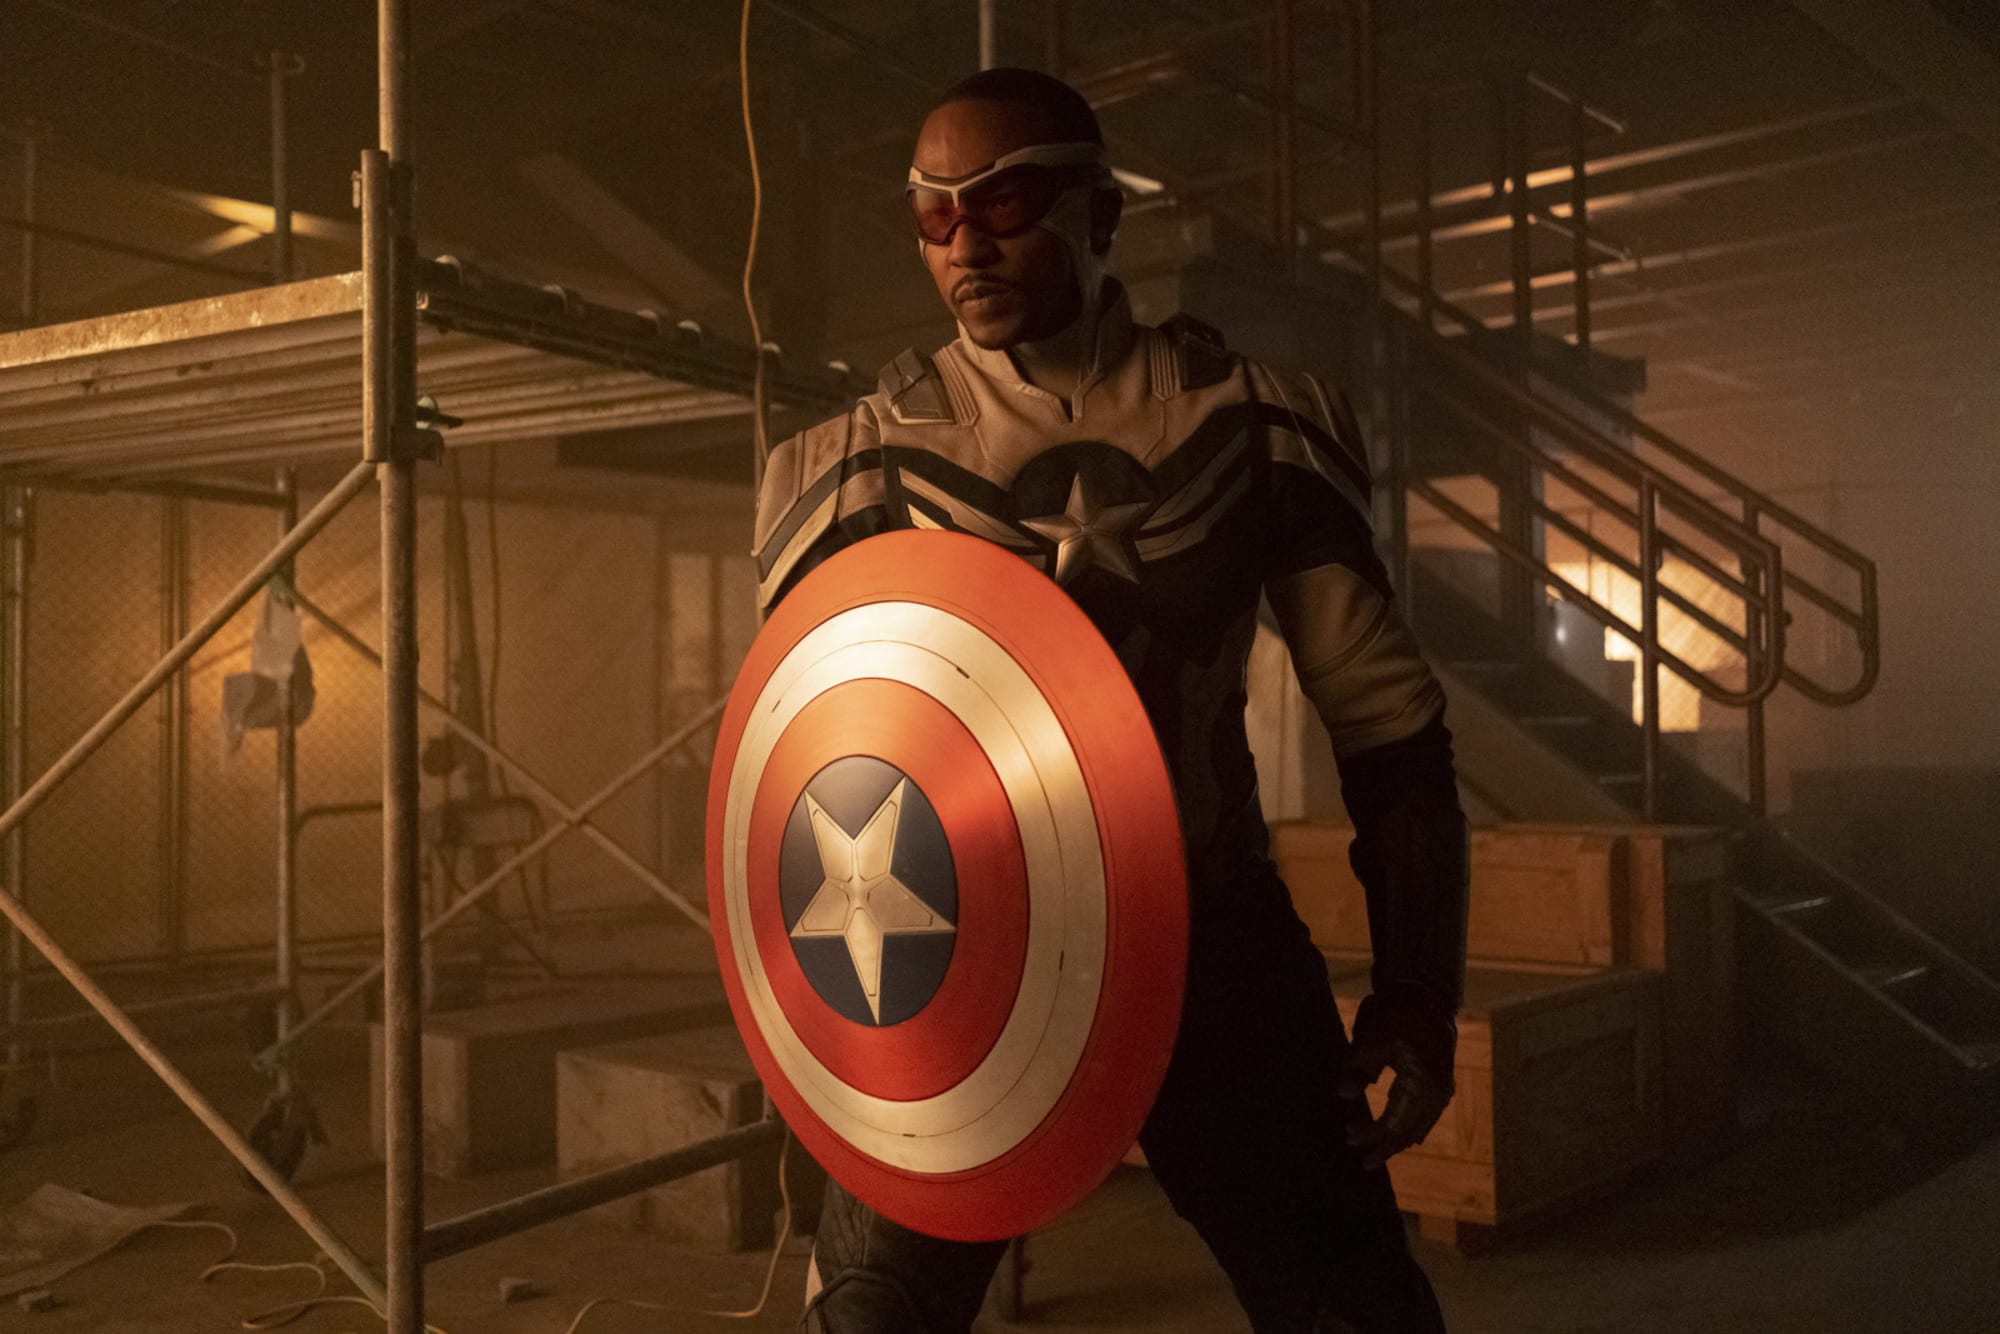 Upcoming Marvel movies: See what's coming in Phase Four and beyond